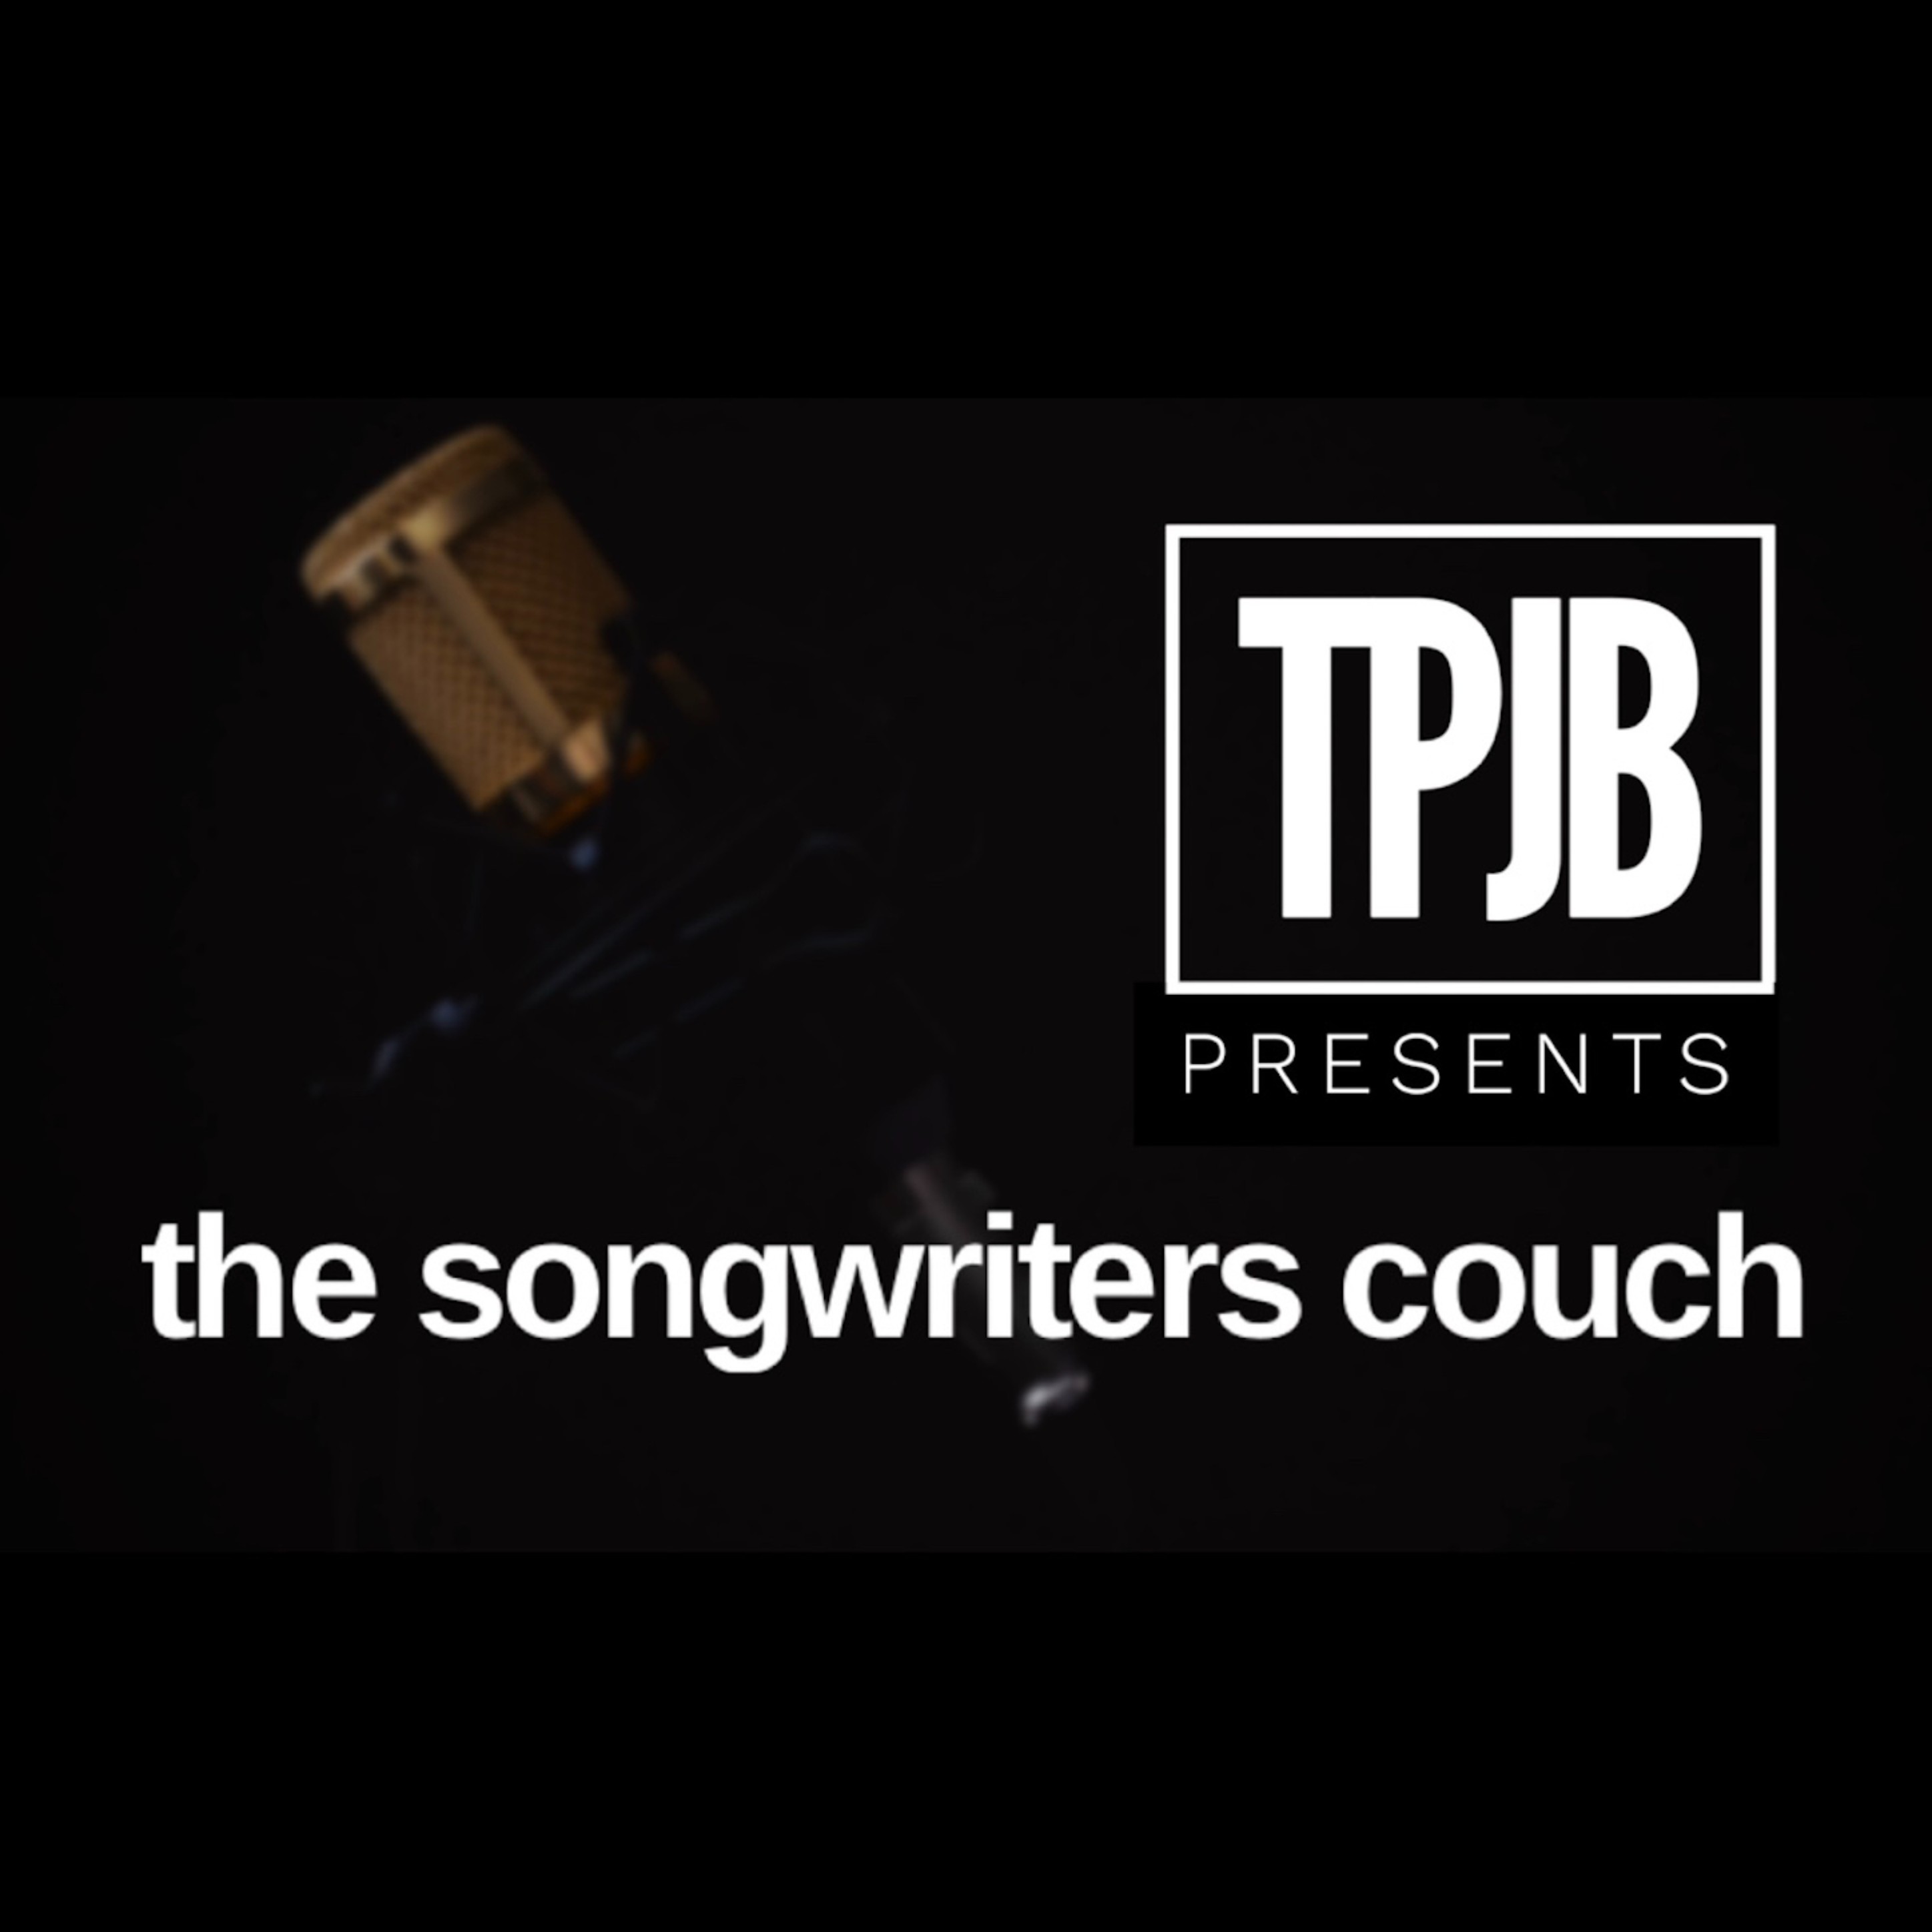 TPJB presents the songwriters couch